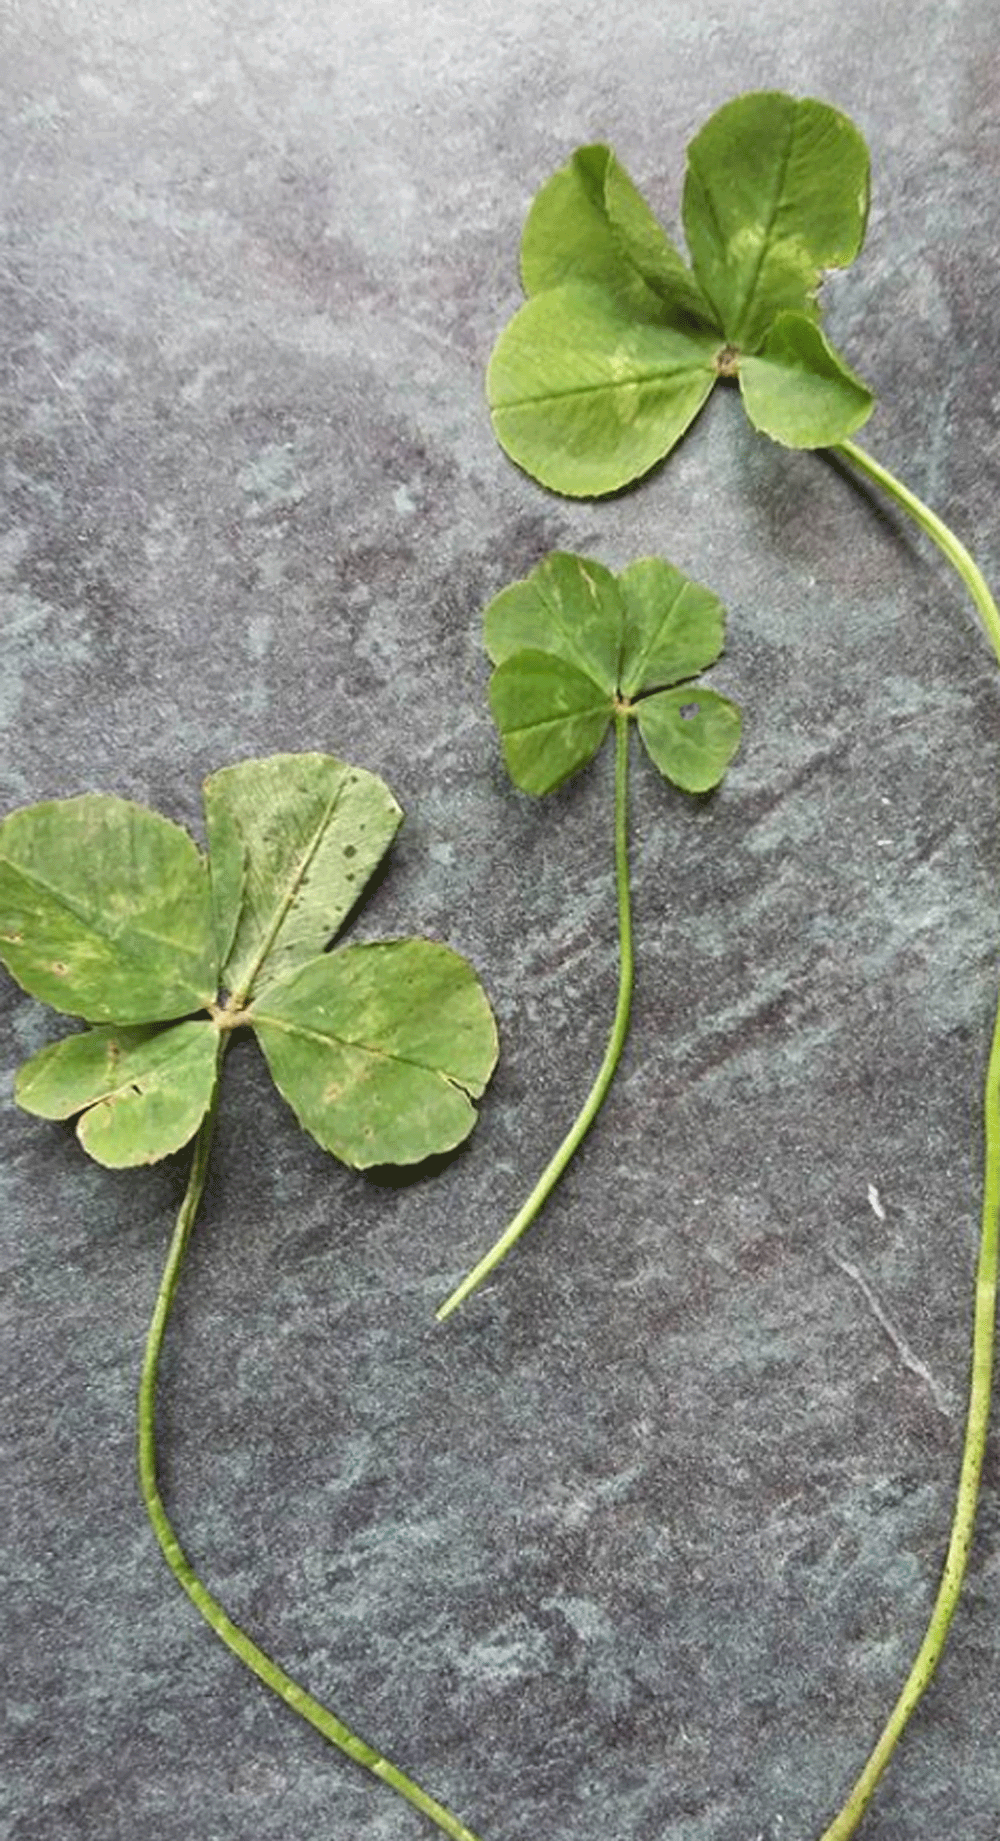 There's a much higher chance of winning the lottery than finding three four-leaf clovers